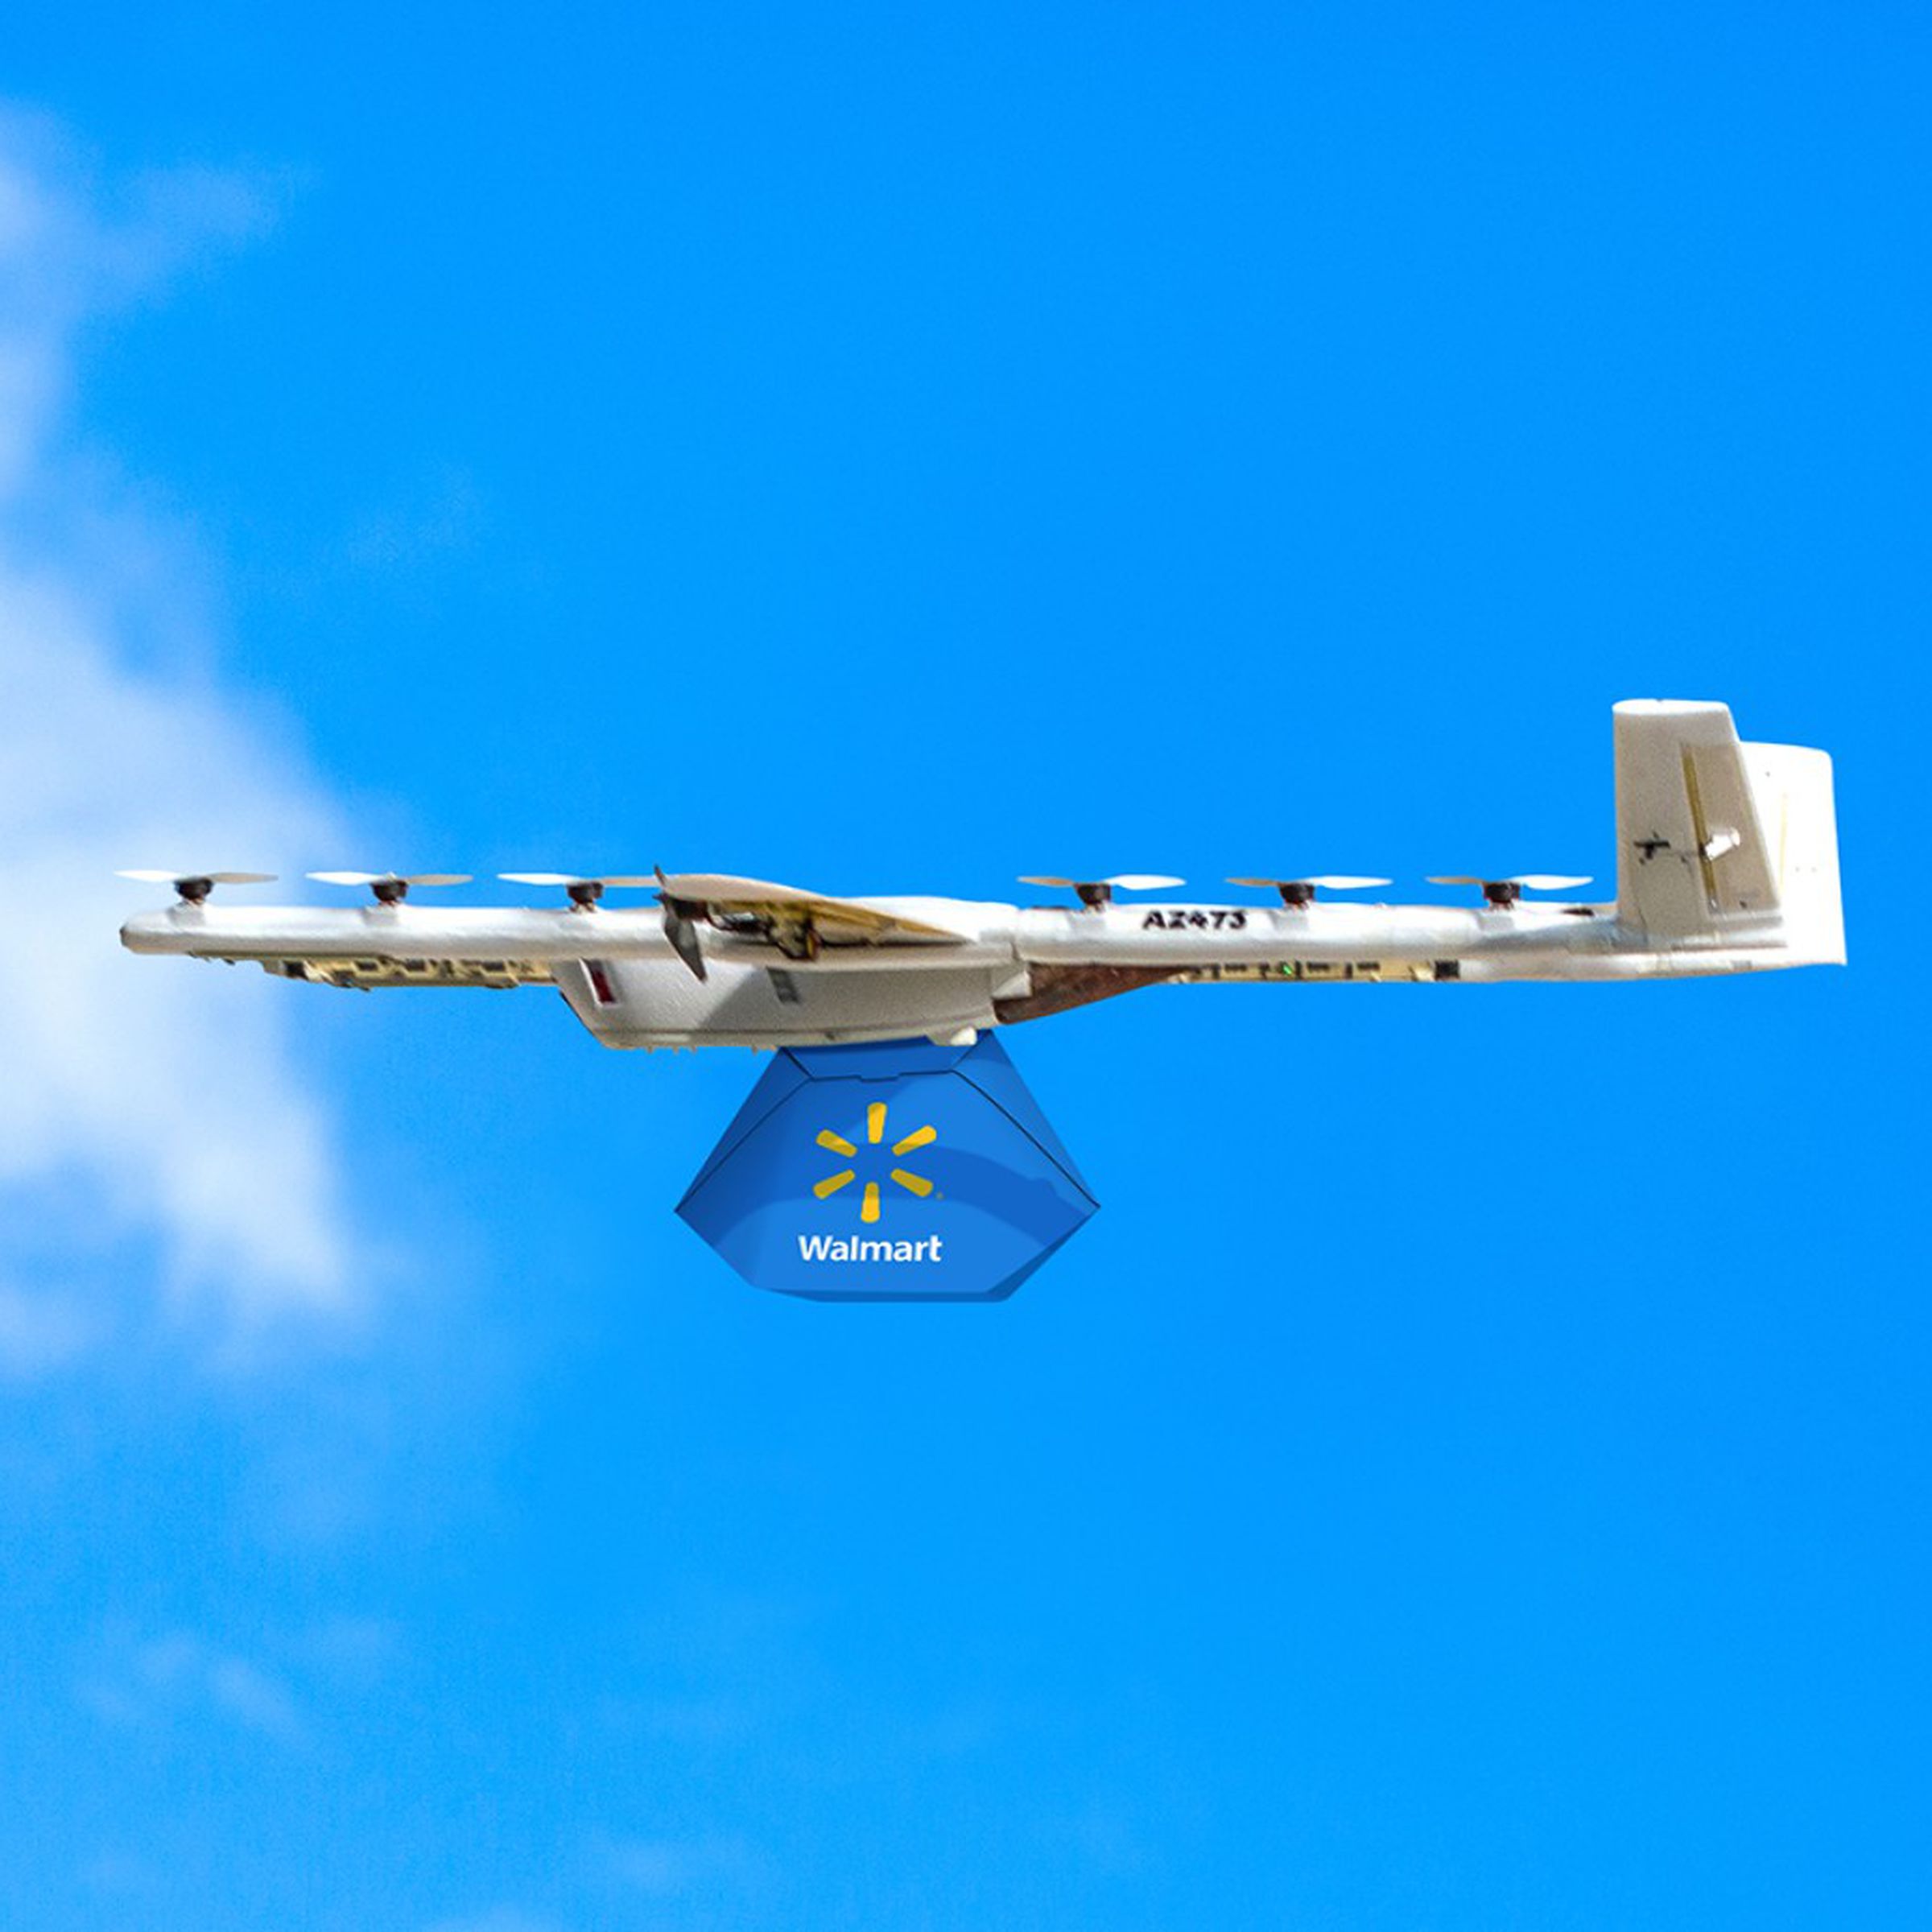 A photo showing a Wing drone carrying a Walmart delivery